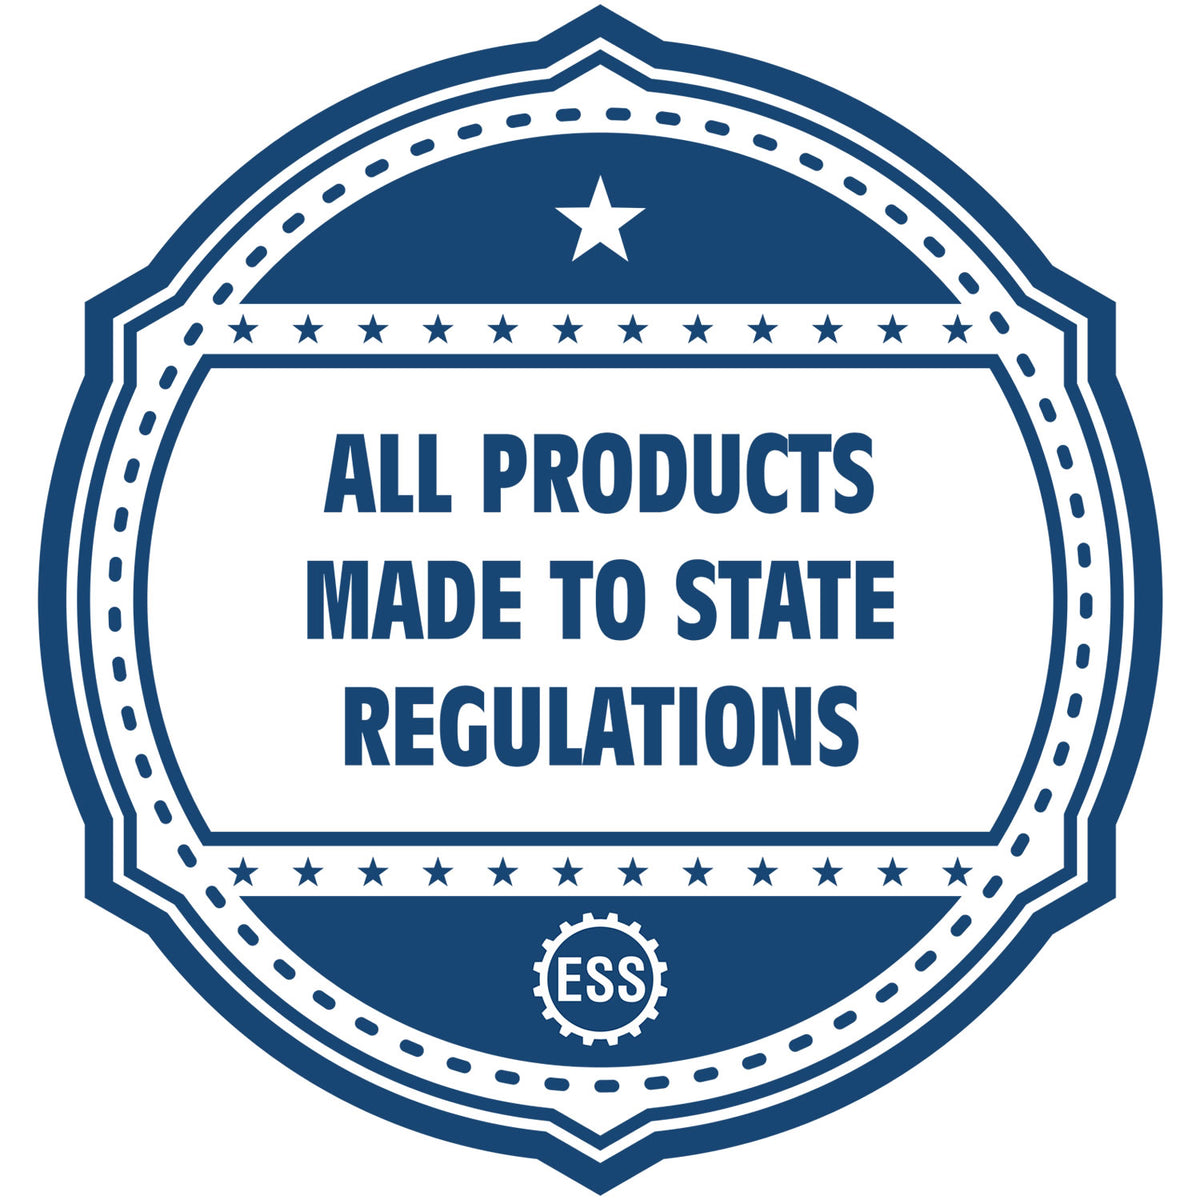 An icon or badge element for the State of Utah Soft Land Surveyor Embossing Seal showing that this product is made in compliance with state regulations.